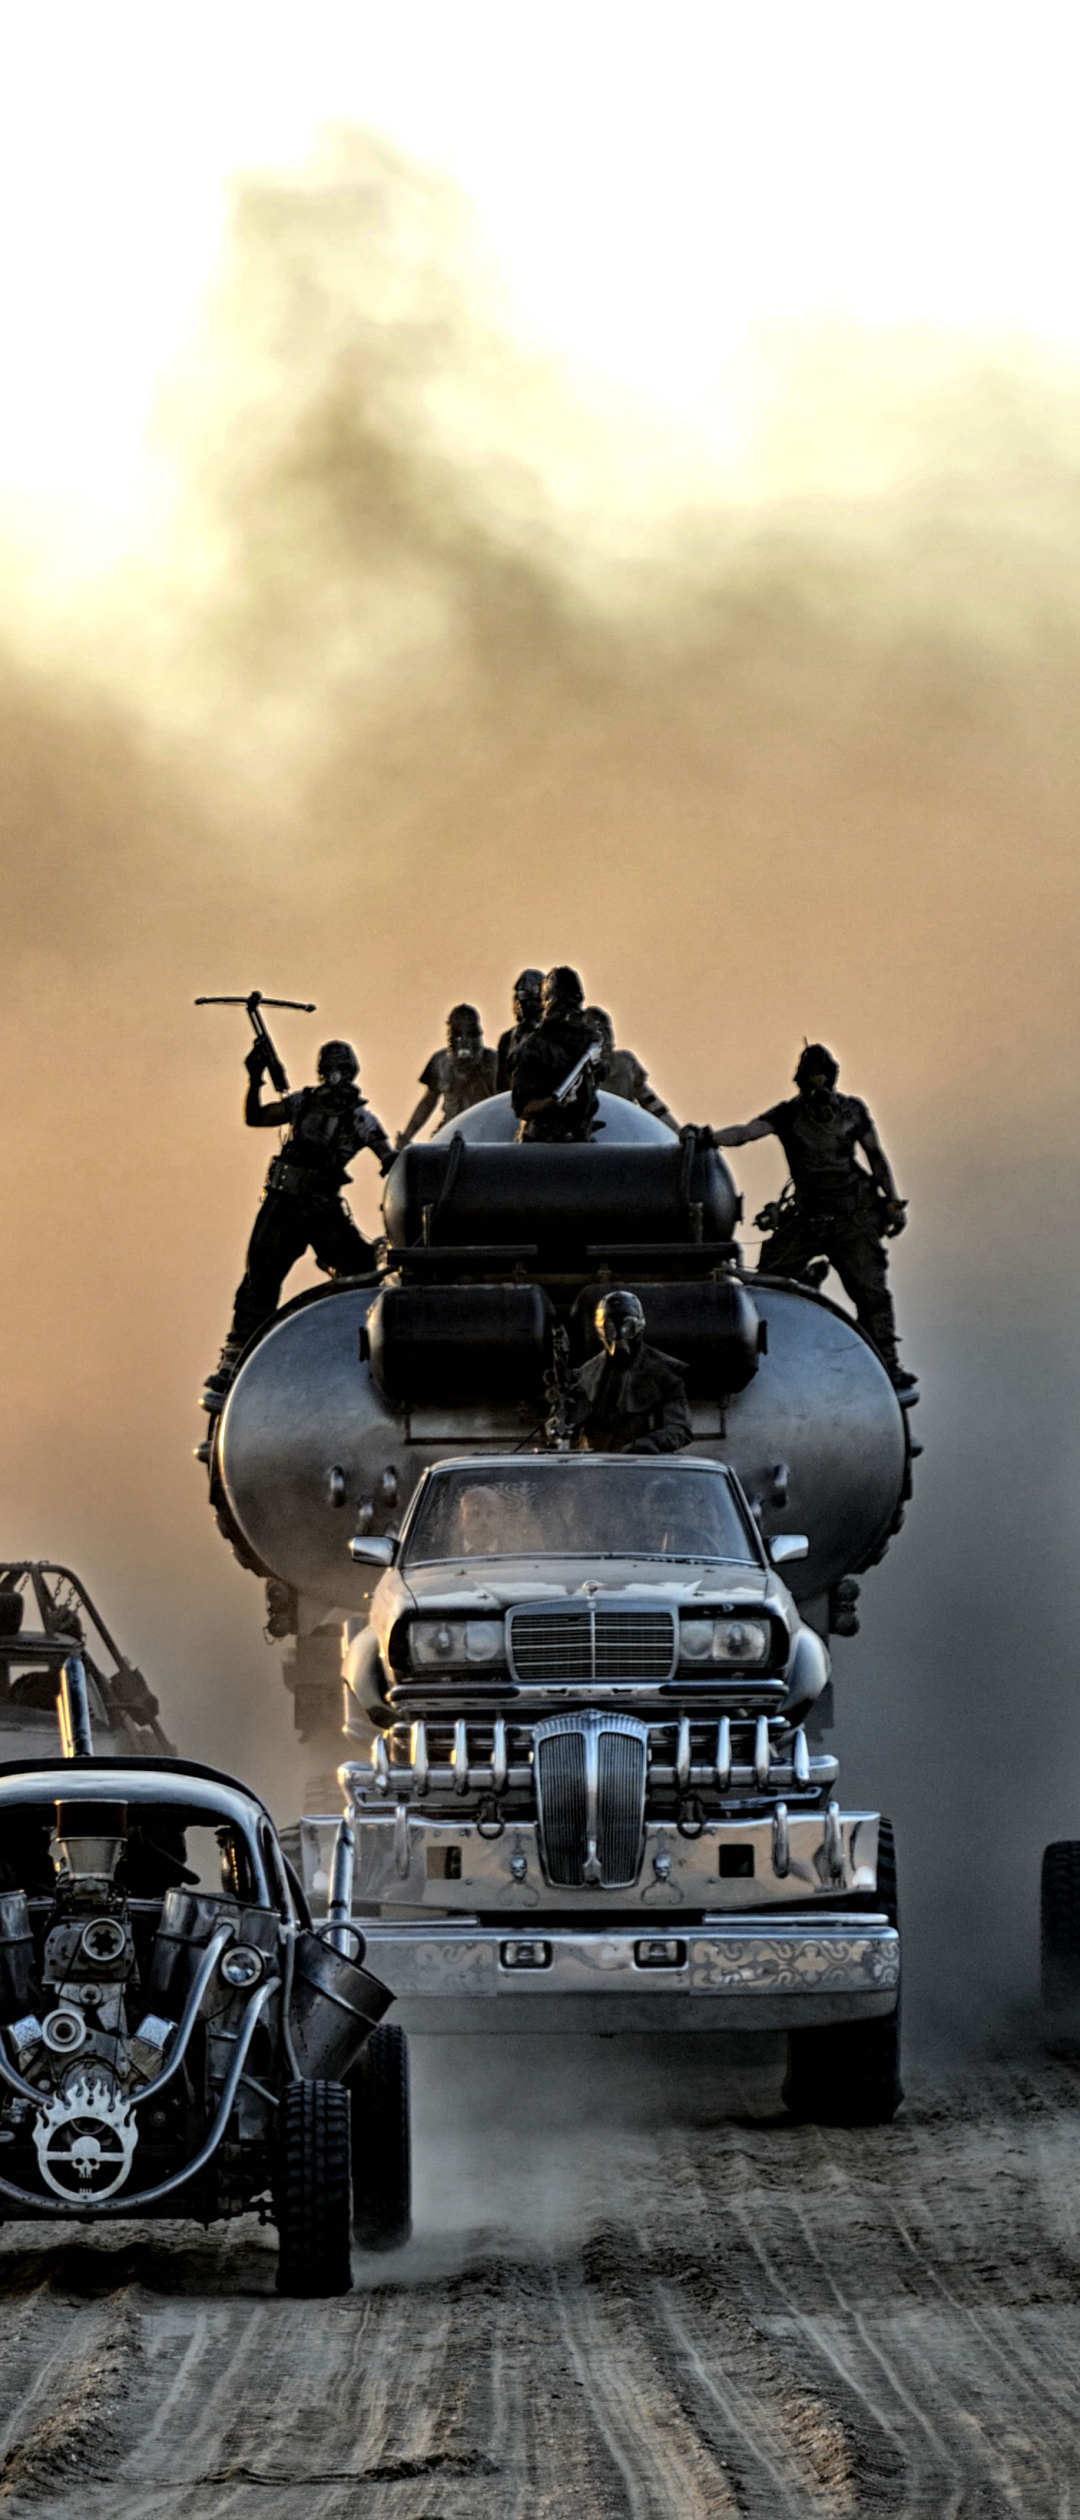 1080x25 Mad Max Fury Road Vehicles Wallpapers 1080x25 Resolution Wallpaper Hd Movies 4k Wallpapers Images Photos And Background Wallpapers Den